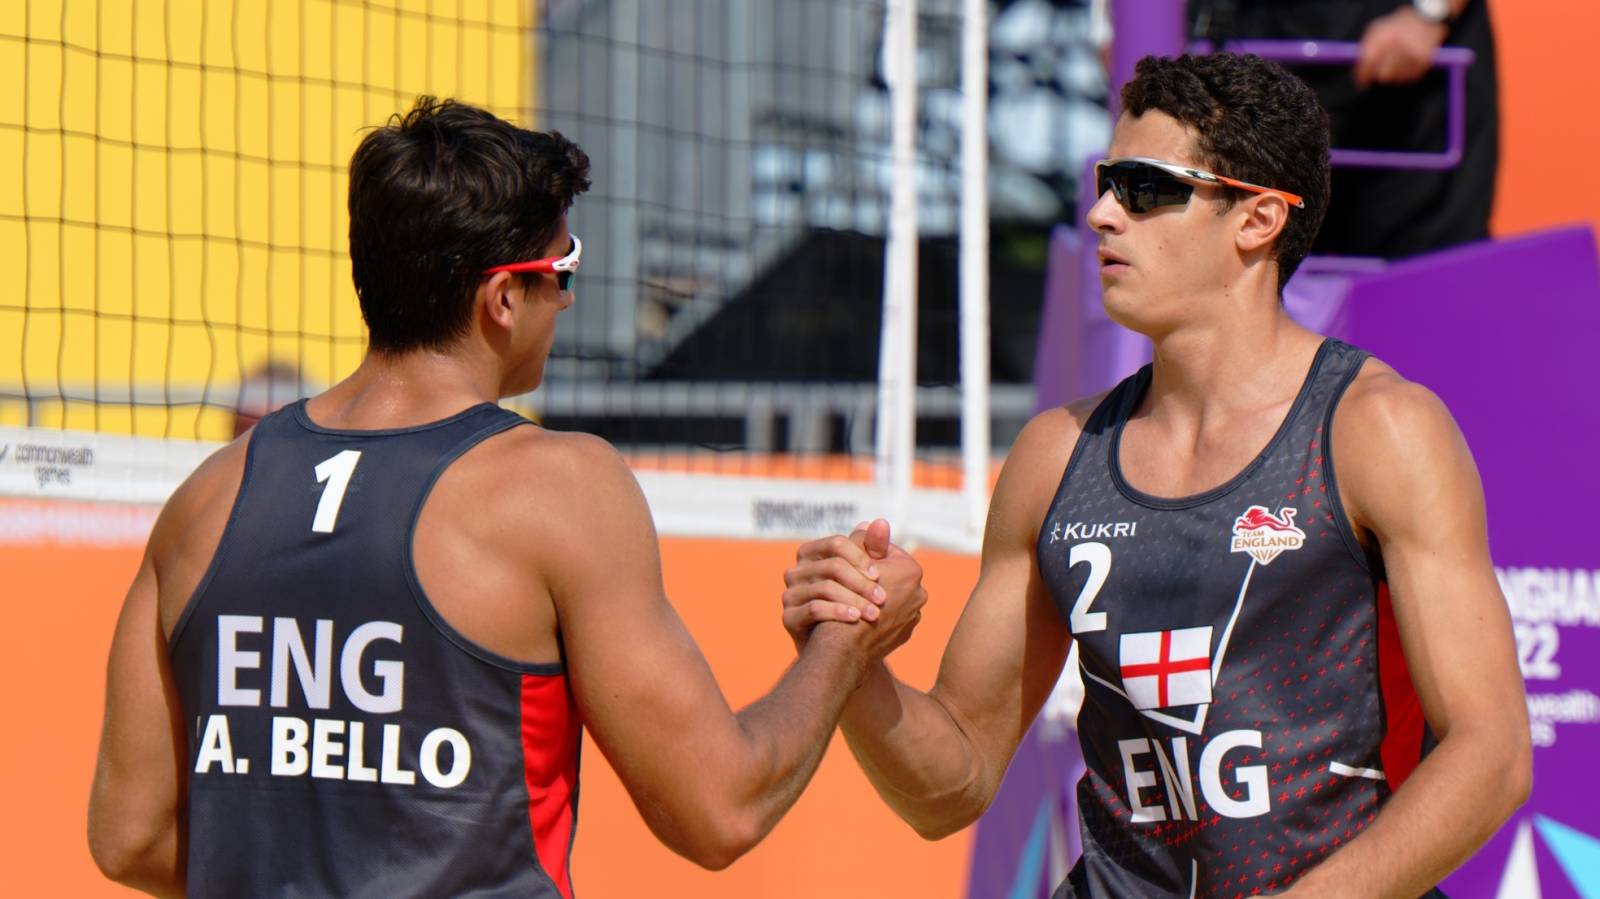 How to watch the Bello brothers' beach volleyball match vs New Zealand